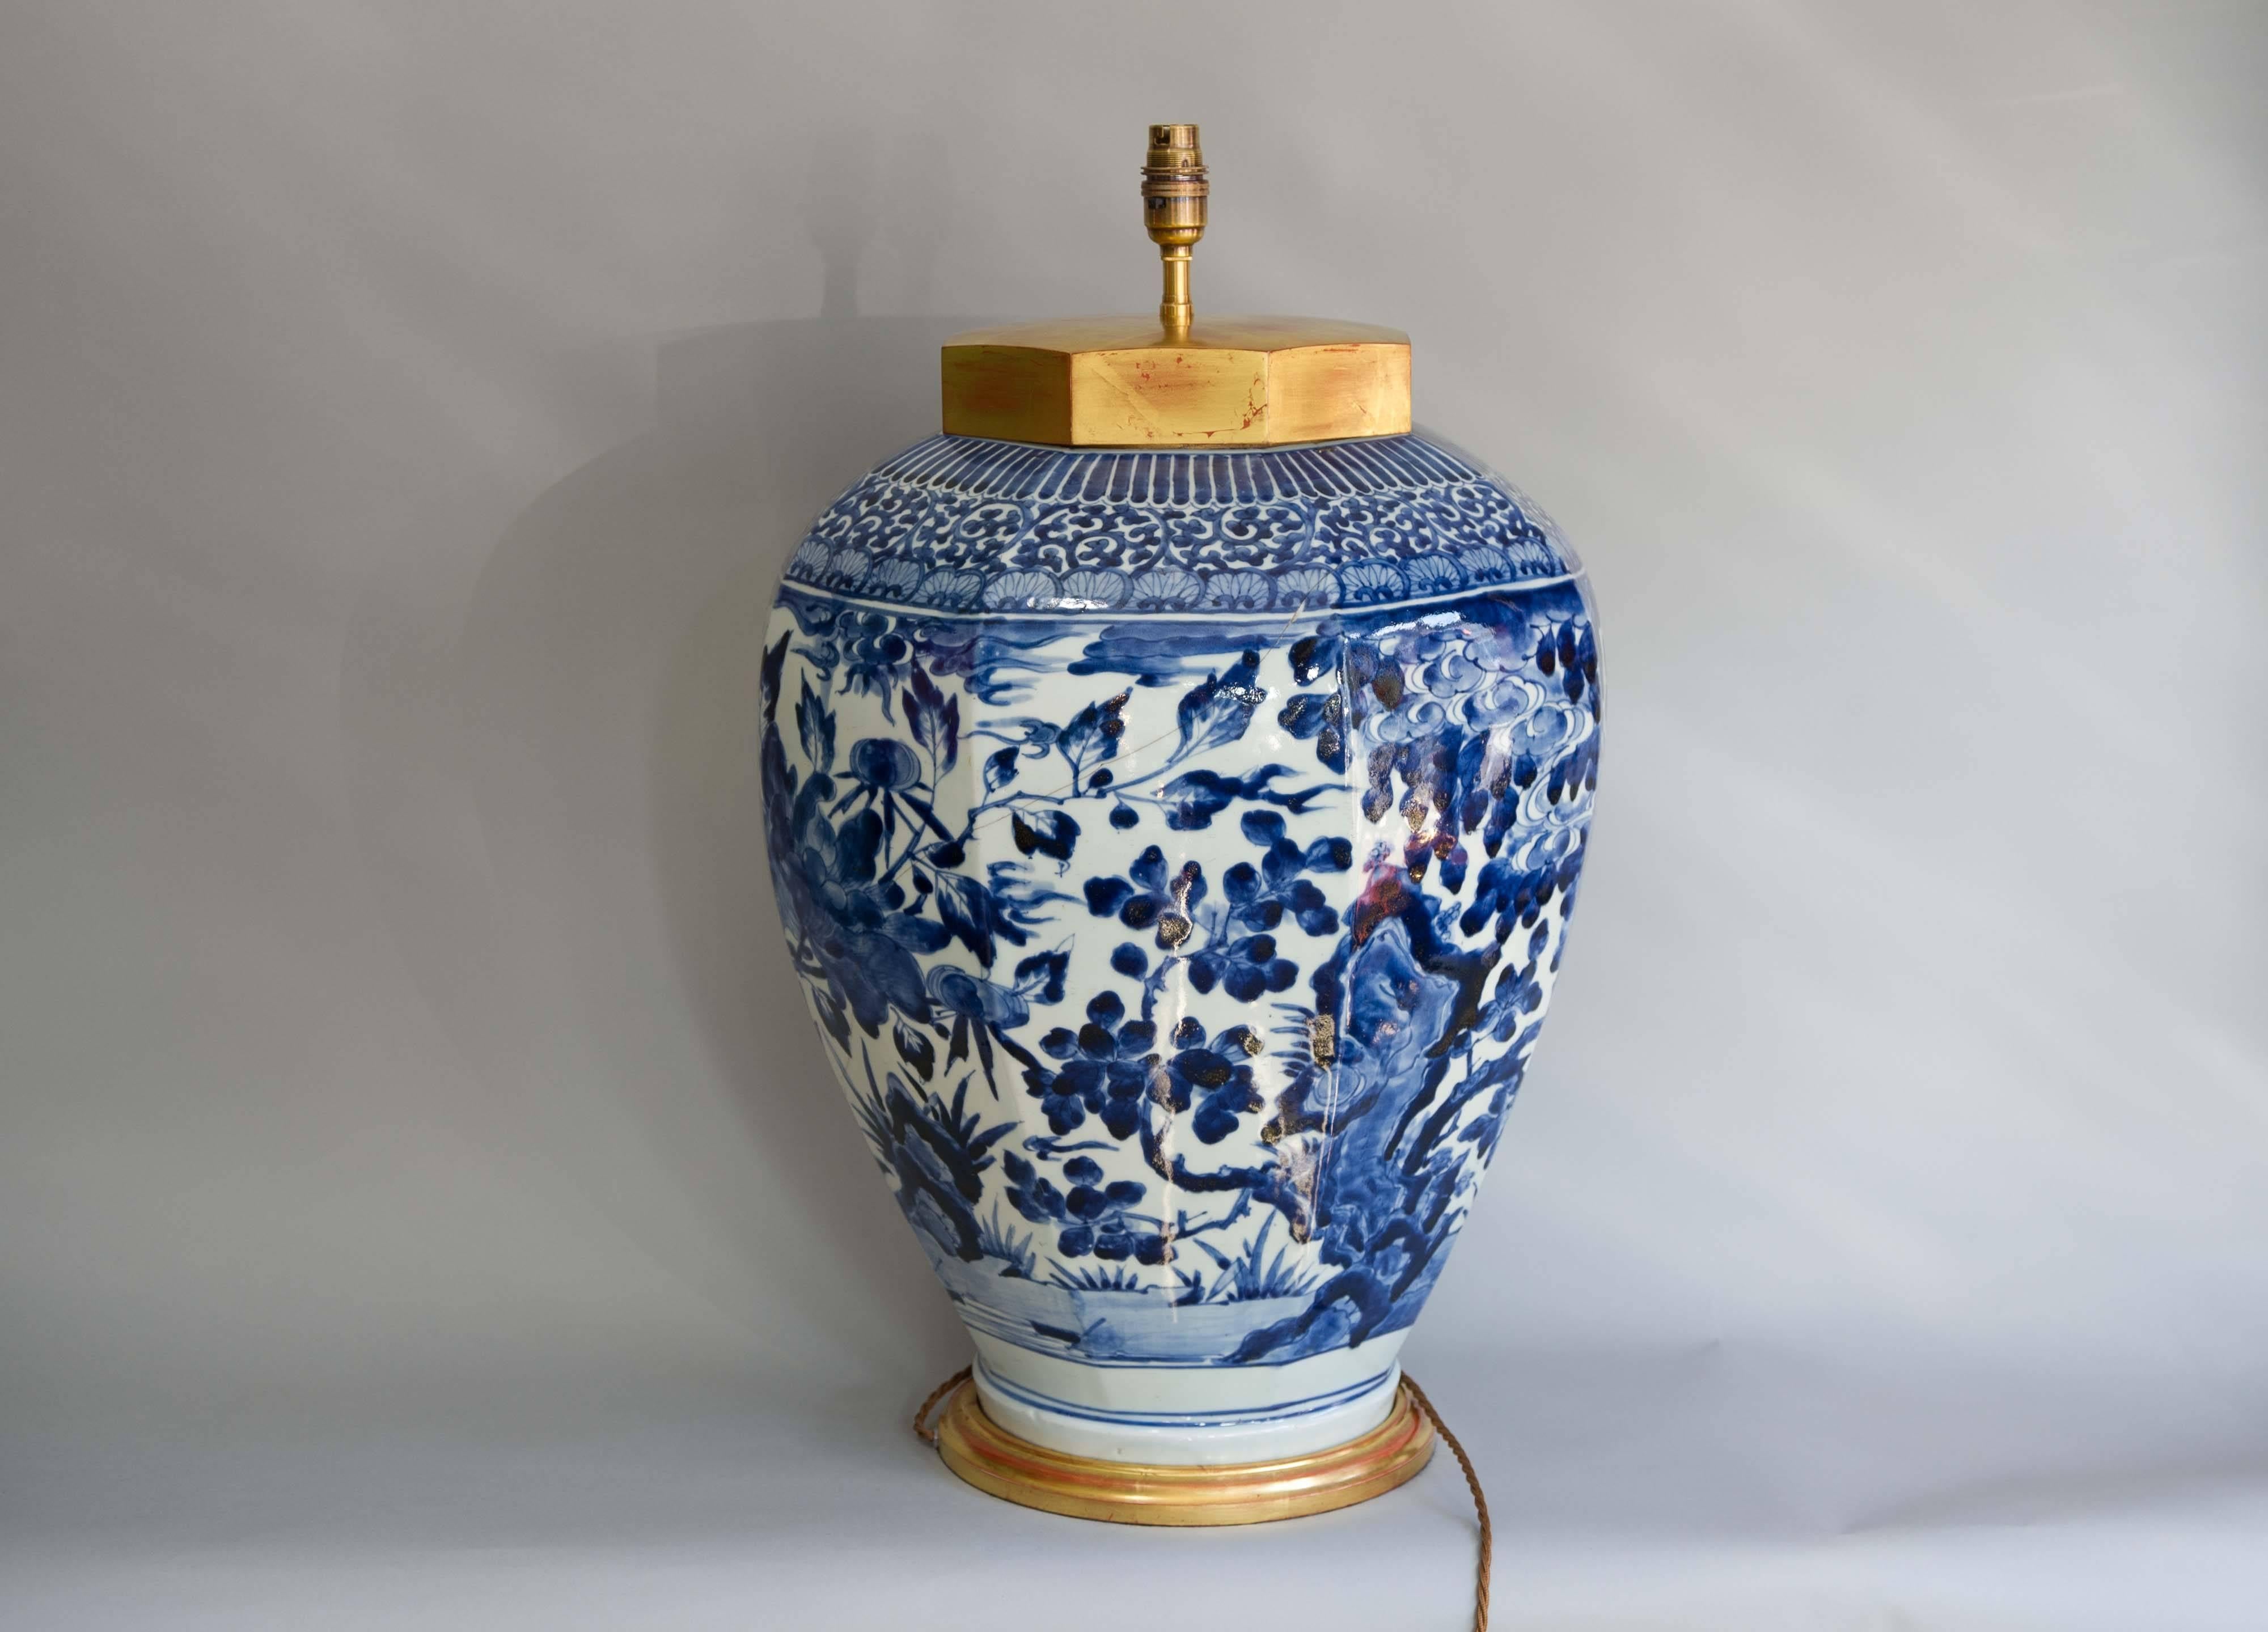 A large late 17th century Japanese octagonal Arita blue and white vase, circa 1680. The vase is of octagonal baluster form, boldly painted with rocks and large blossoming foliage composed around the entire body within stylized borders. This vase has